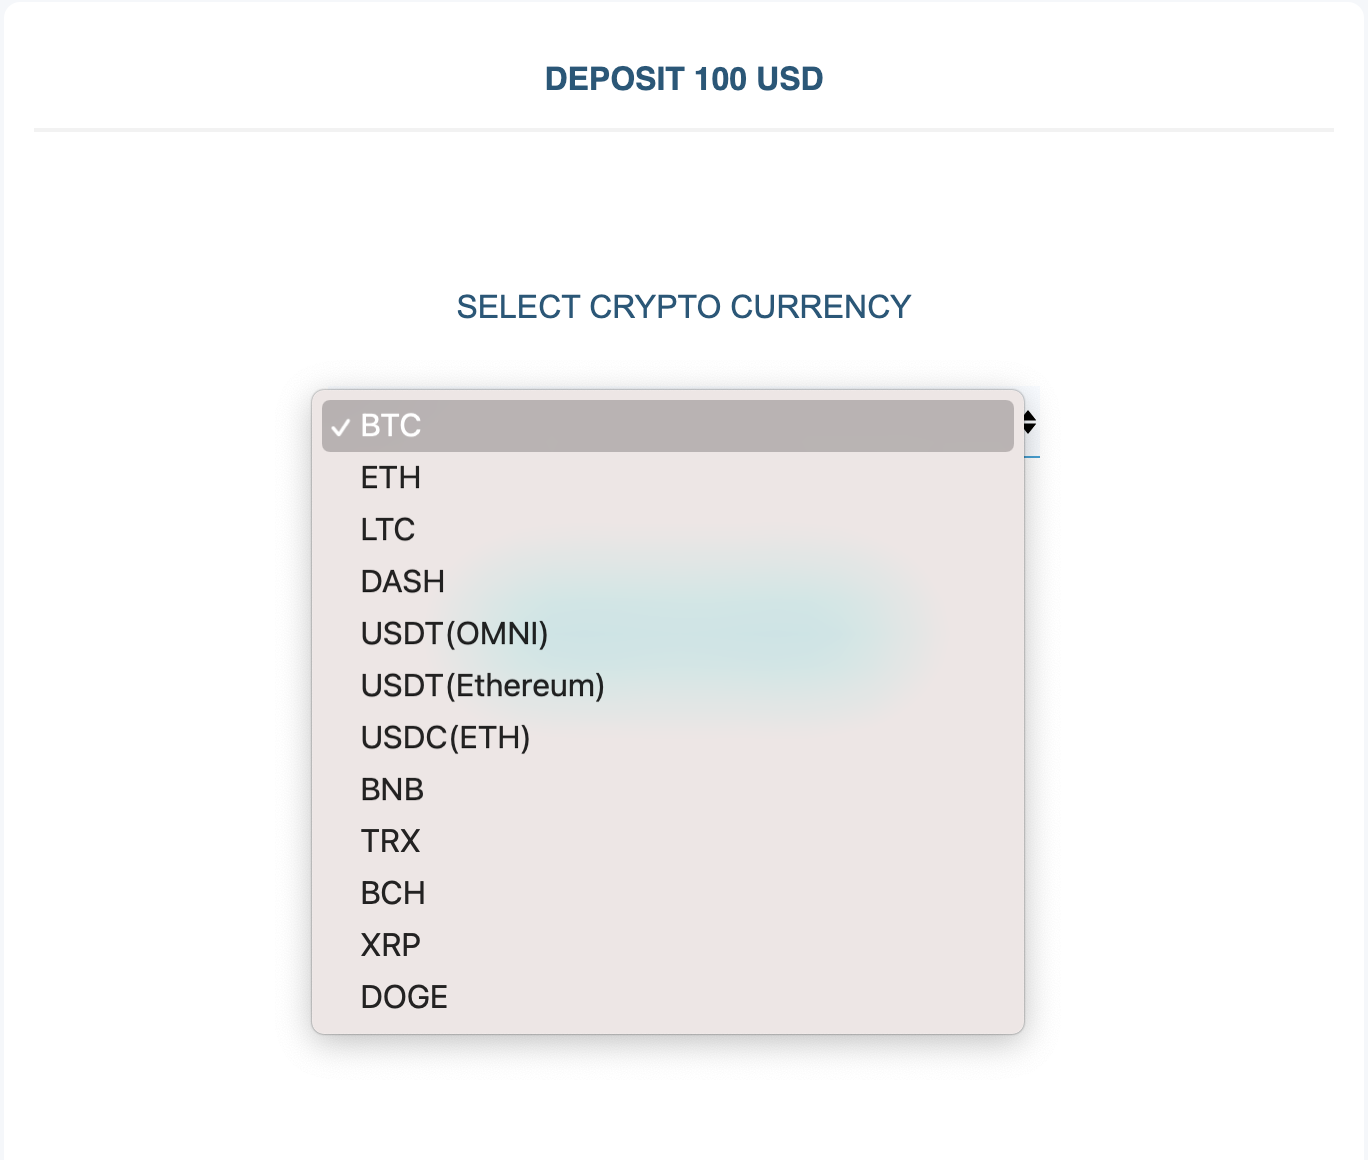 4. Select the cryptocurrency you would like to deposit in from the dropdown list.